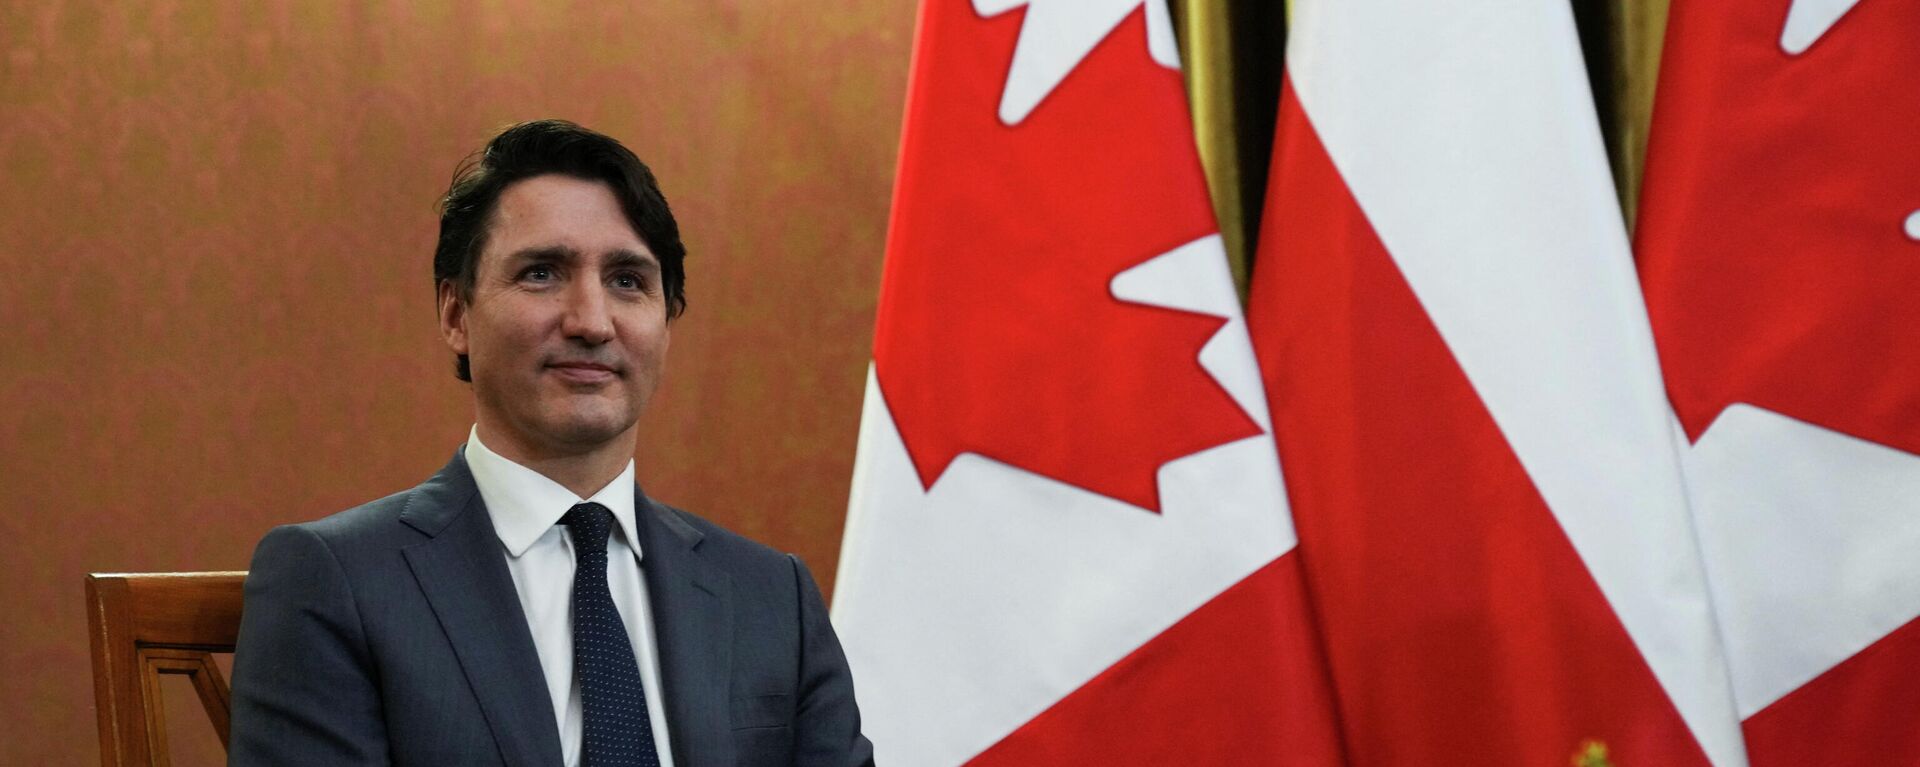 Canadian Prime Minister Justin Trudeau sits as he meets Polish Prime Minister Mateusz Morawiecki, amid Russia's invasion of Ukraine, in Warsaw, Poland, March 10, 2022 - Sputnik International, 1920, 14.03.2022